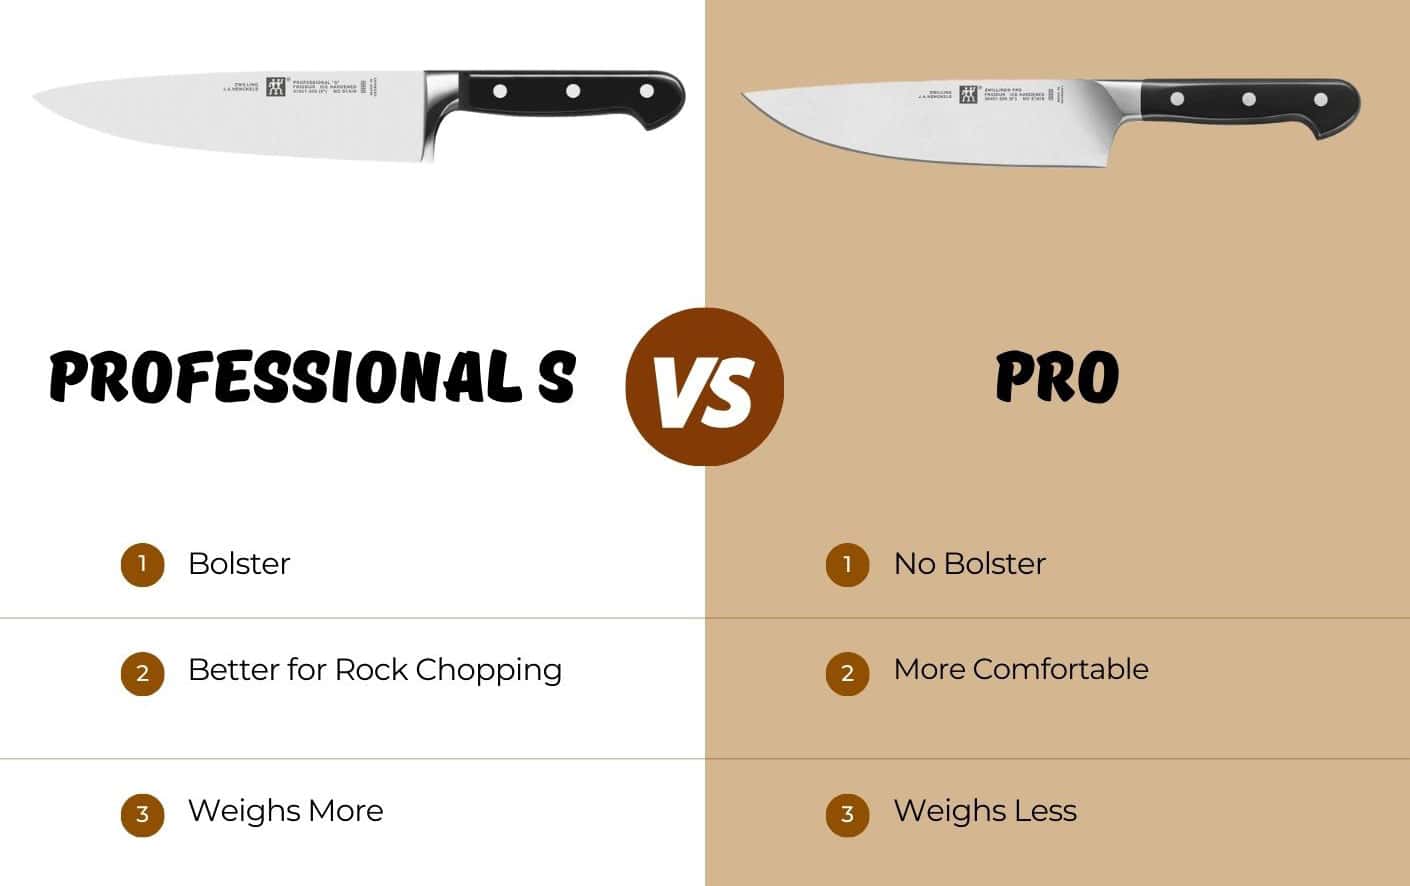 This Chart compares the Zwilling Professional S chef knife to the Zwilling Pro chef knife.